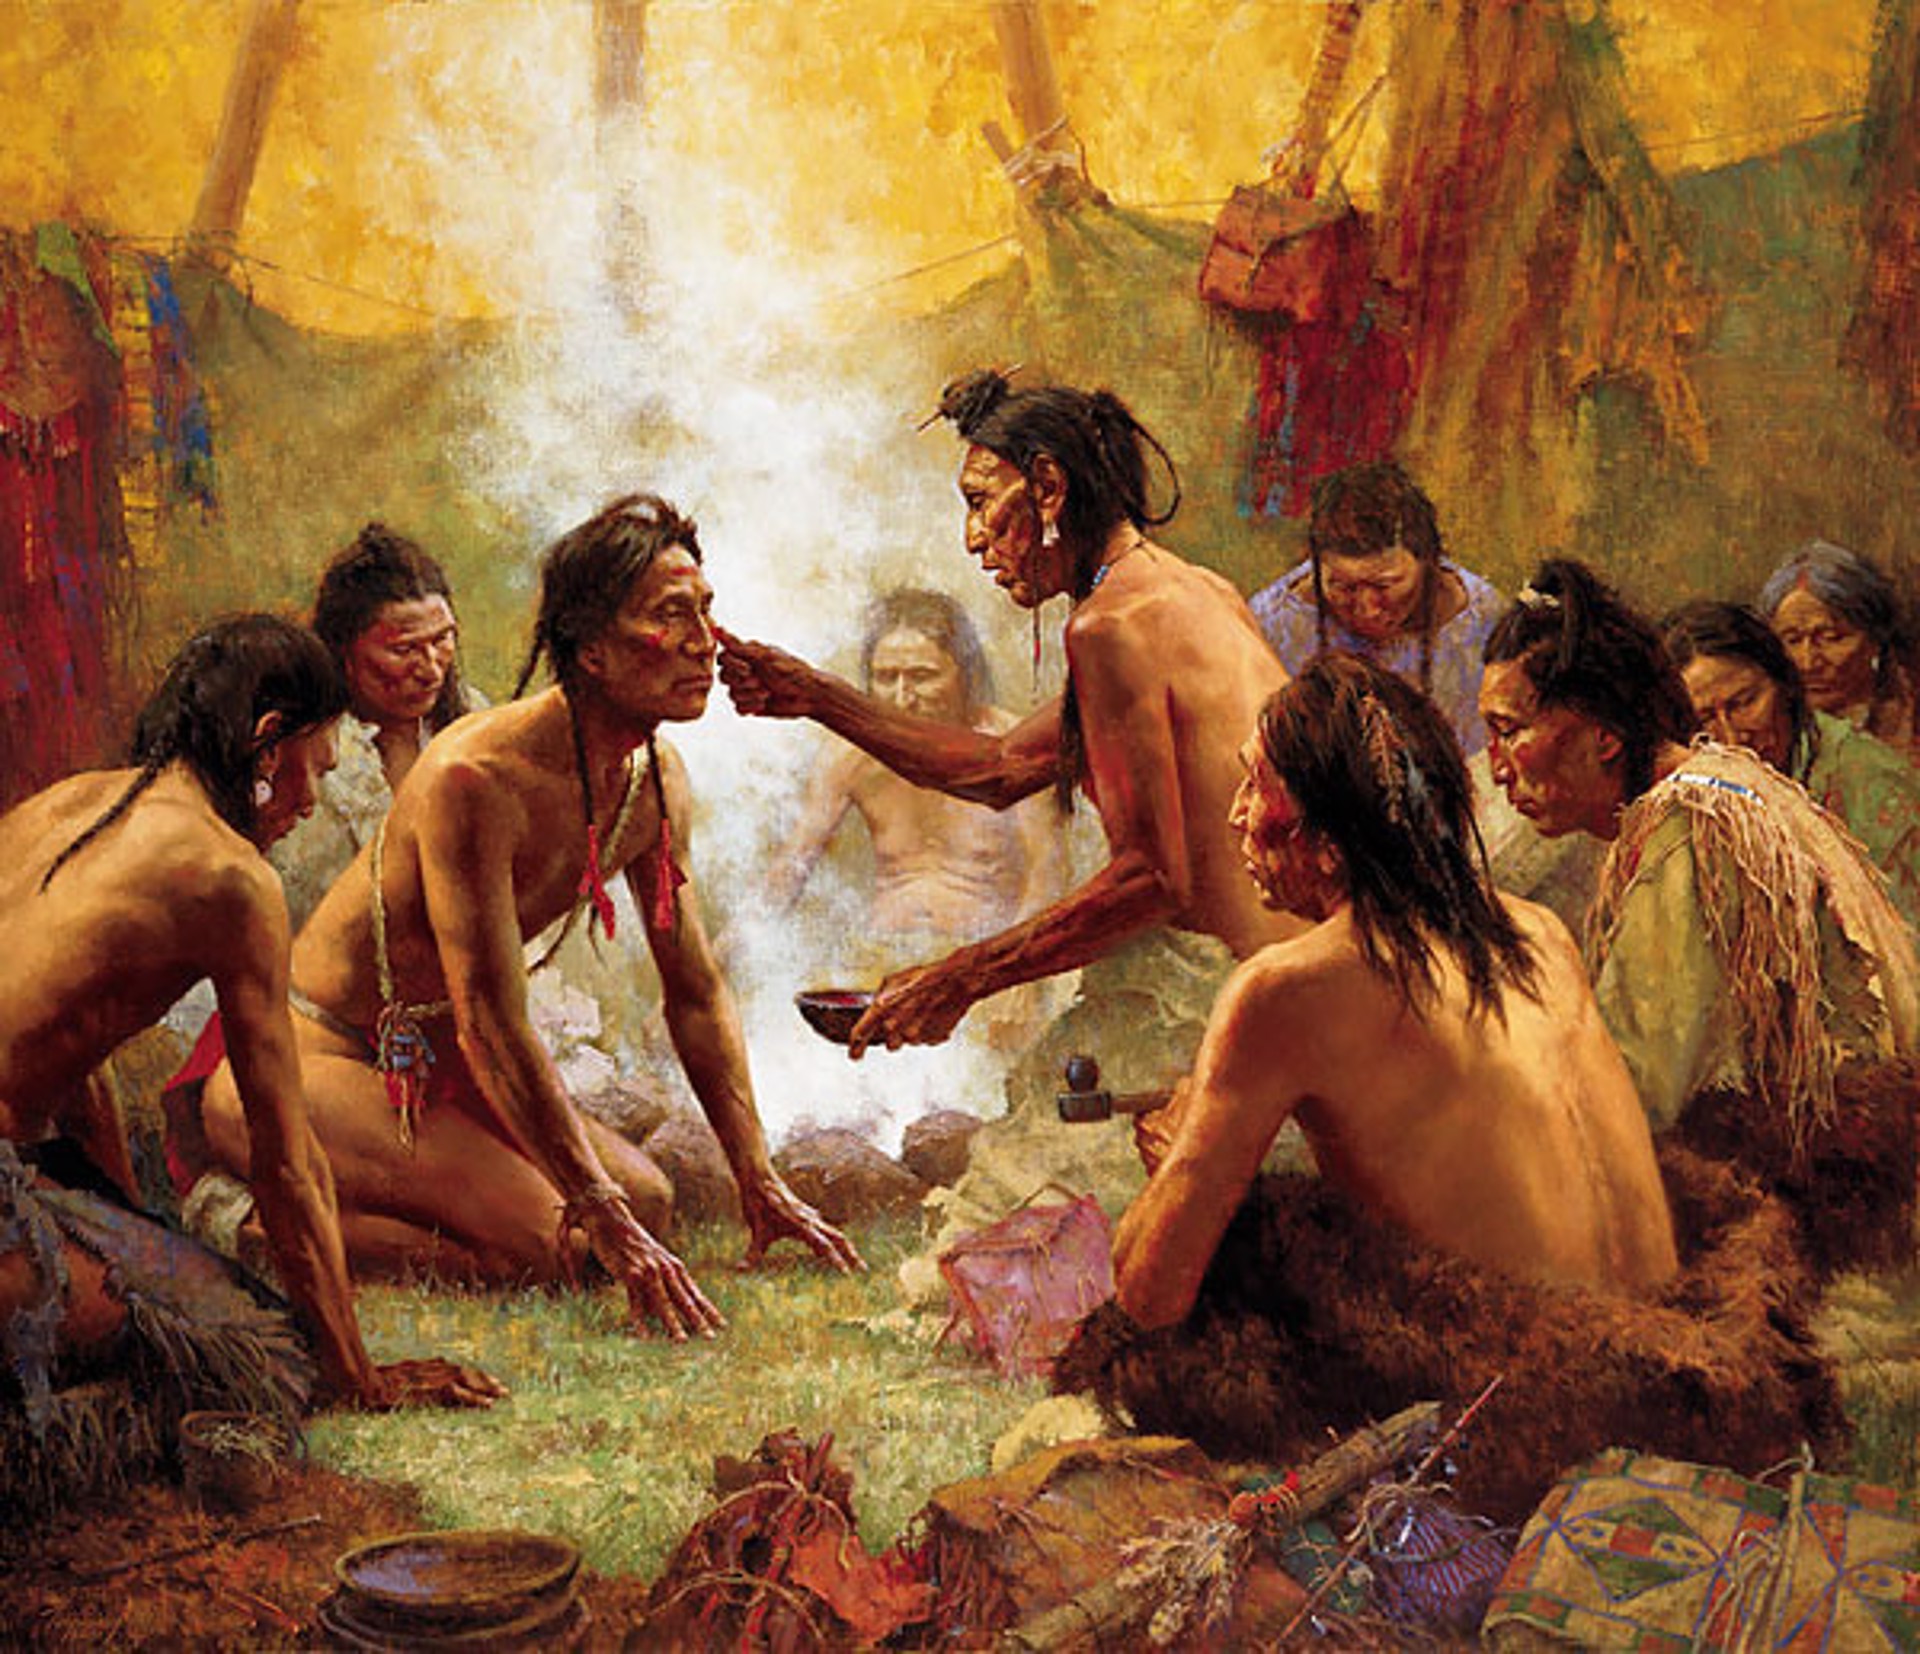 Blessings from the Medicine Man by Howard Terpning